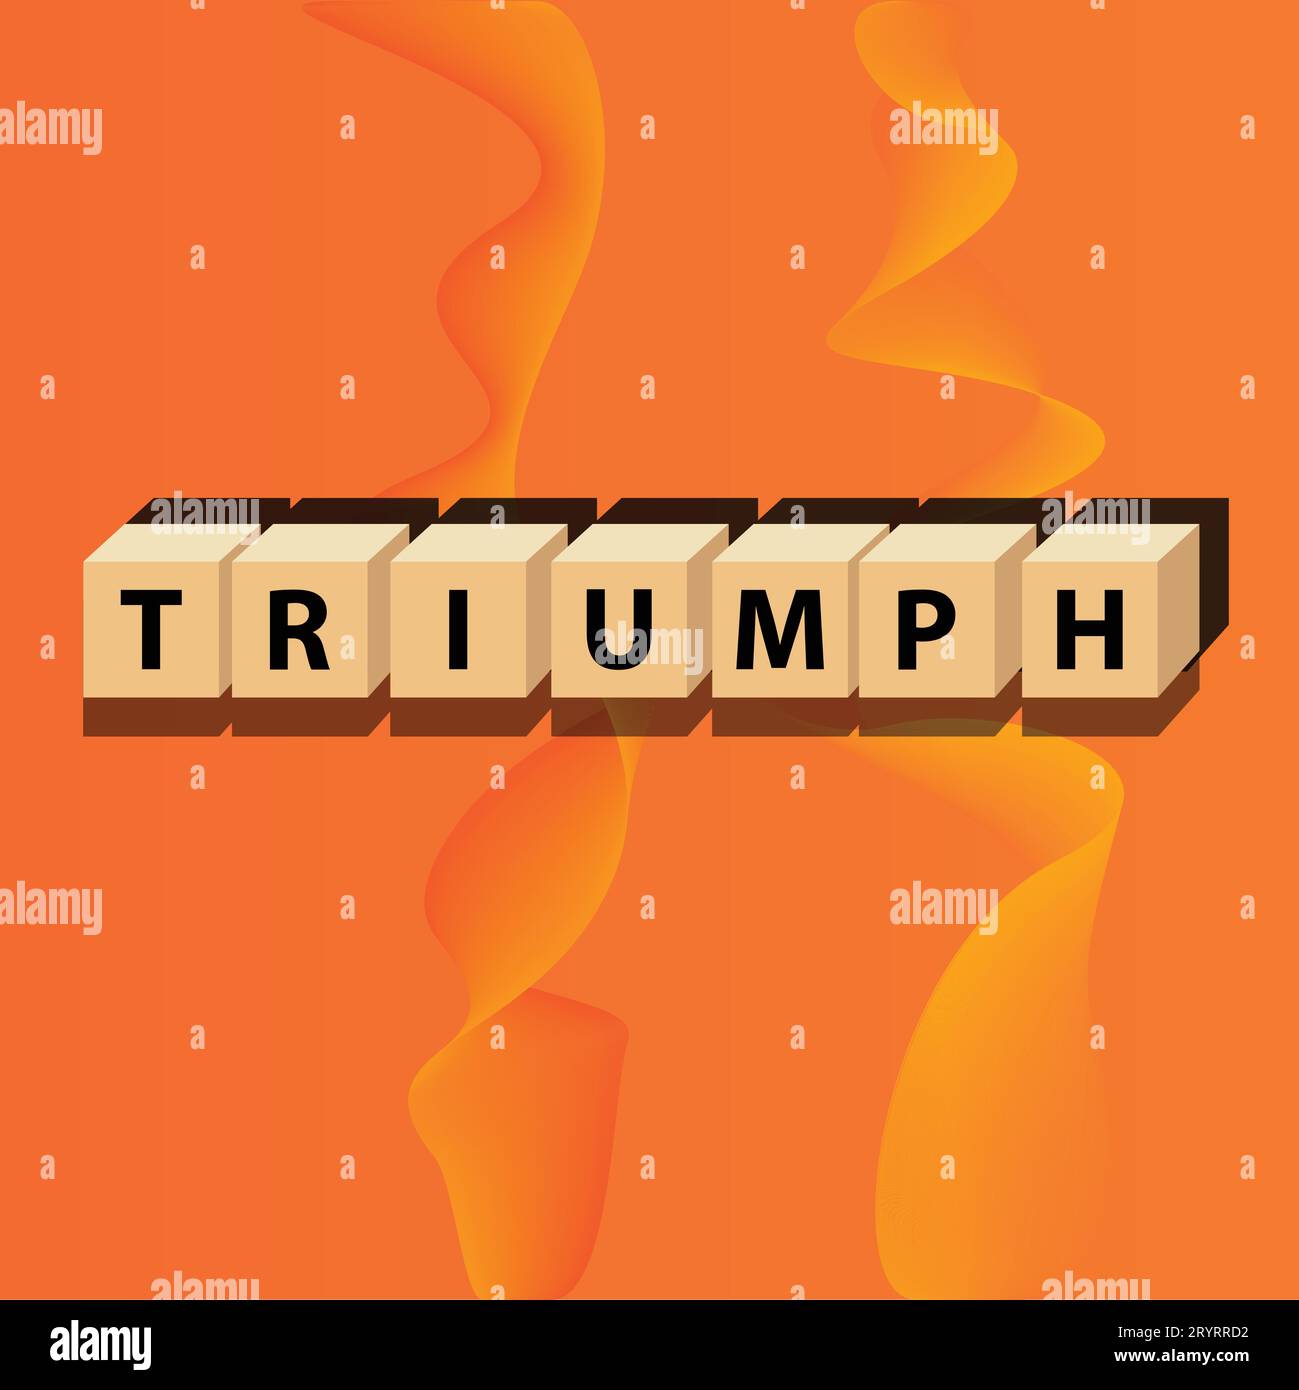 Triumph: cube words, positivity, vector illustration design for graphics and prints. Positive affirmations for every day. A motivational concept. Stock Vector